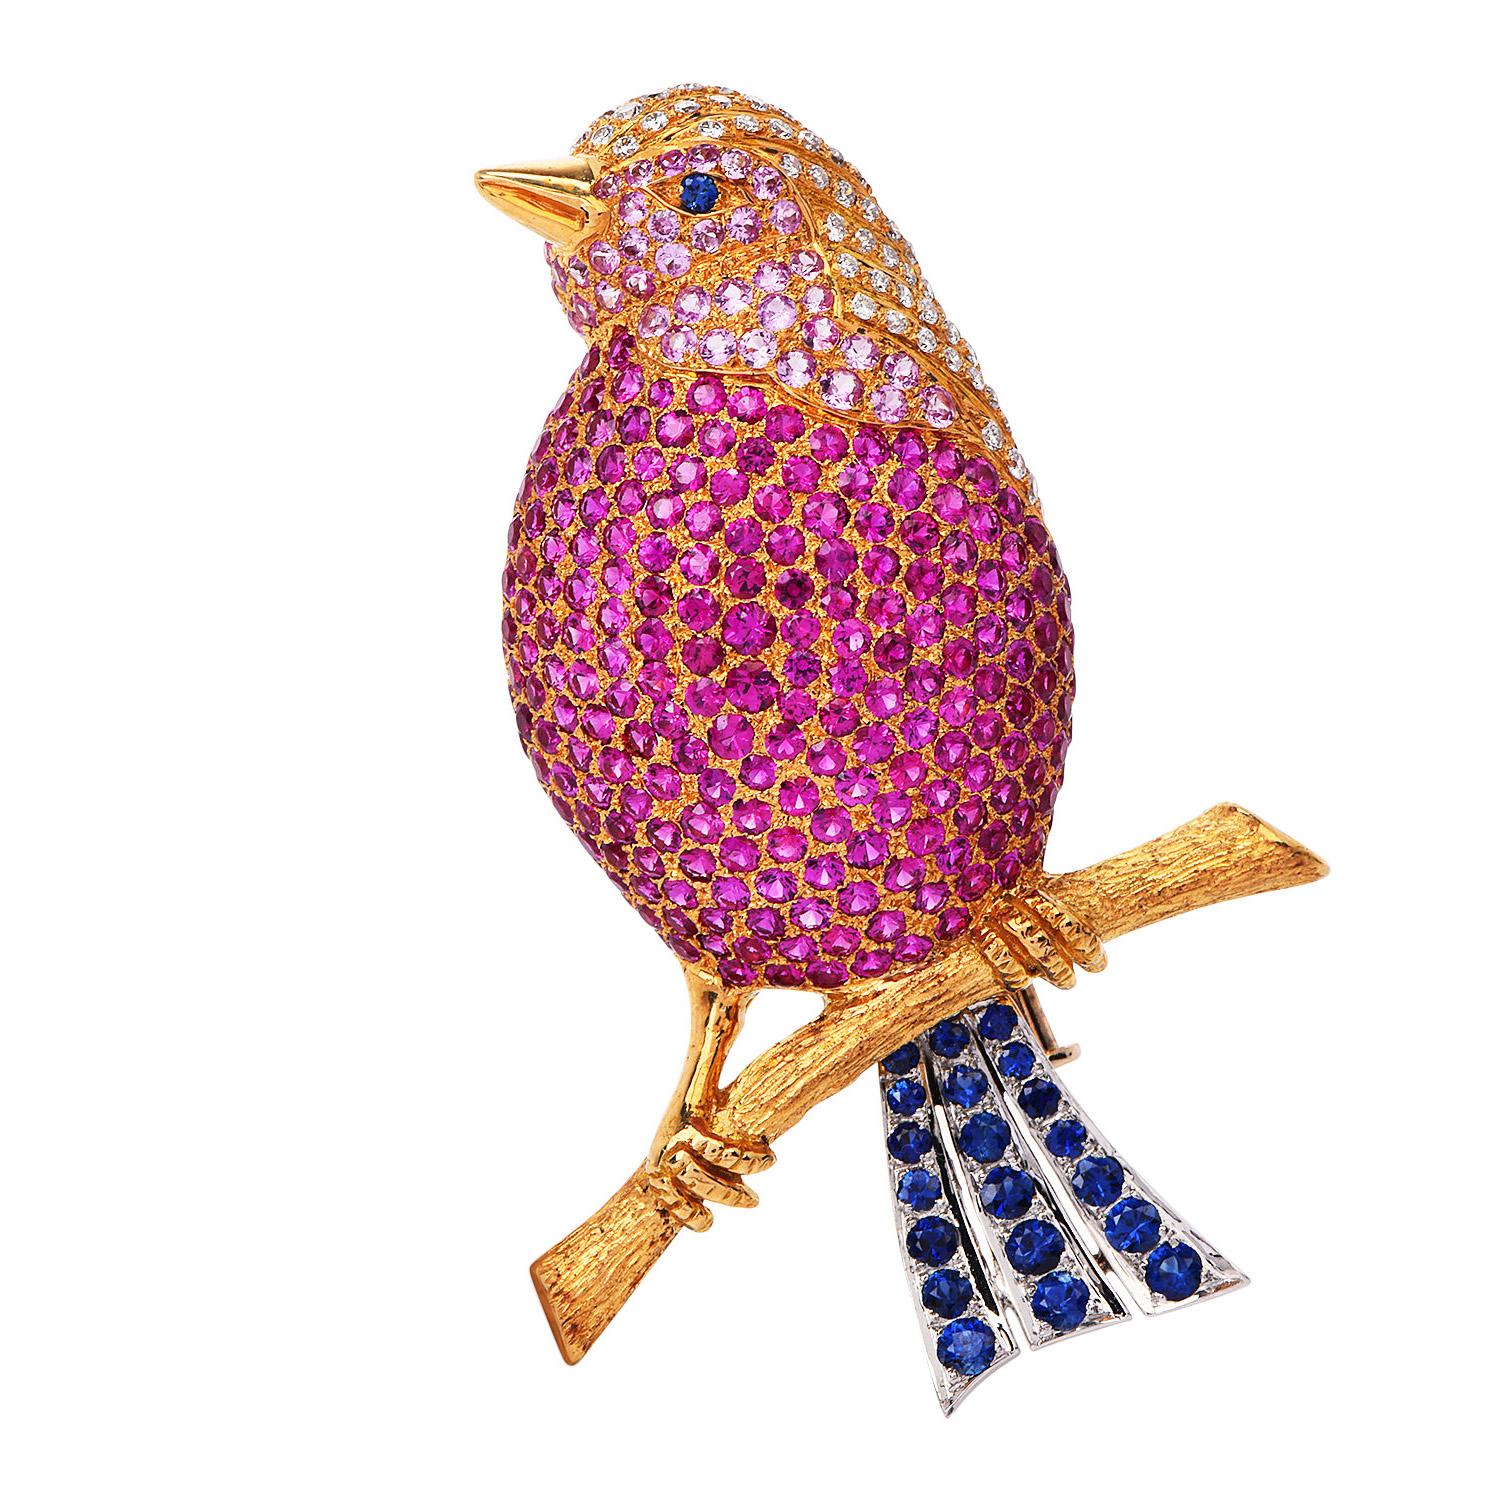 This stunning high-quality made vintage songbird pin is crafted in solid 18K yellow gold.

Its crest is elaborated with 53 genuine pave set round fancy natural diamonds approx. 0.50 carats, and G-H color, VS clarity. 

The body of the bird is finely